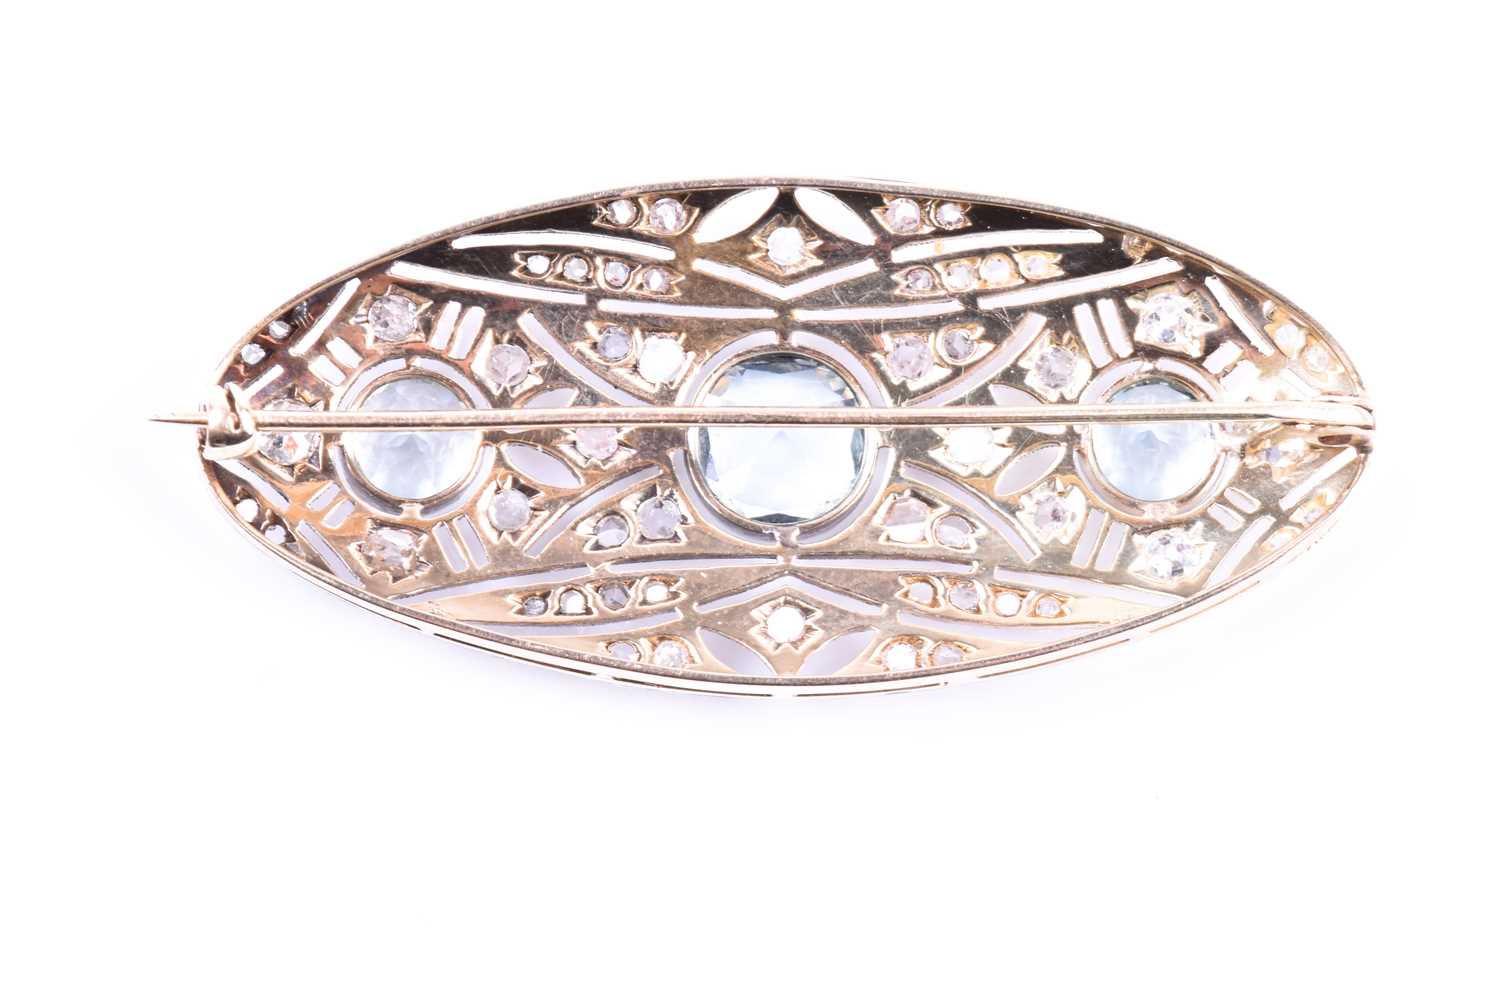 An Art Deco diamond and aquamarine brooch of elongated oval form, the openwork mount set with rose- - Image 3 of 3